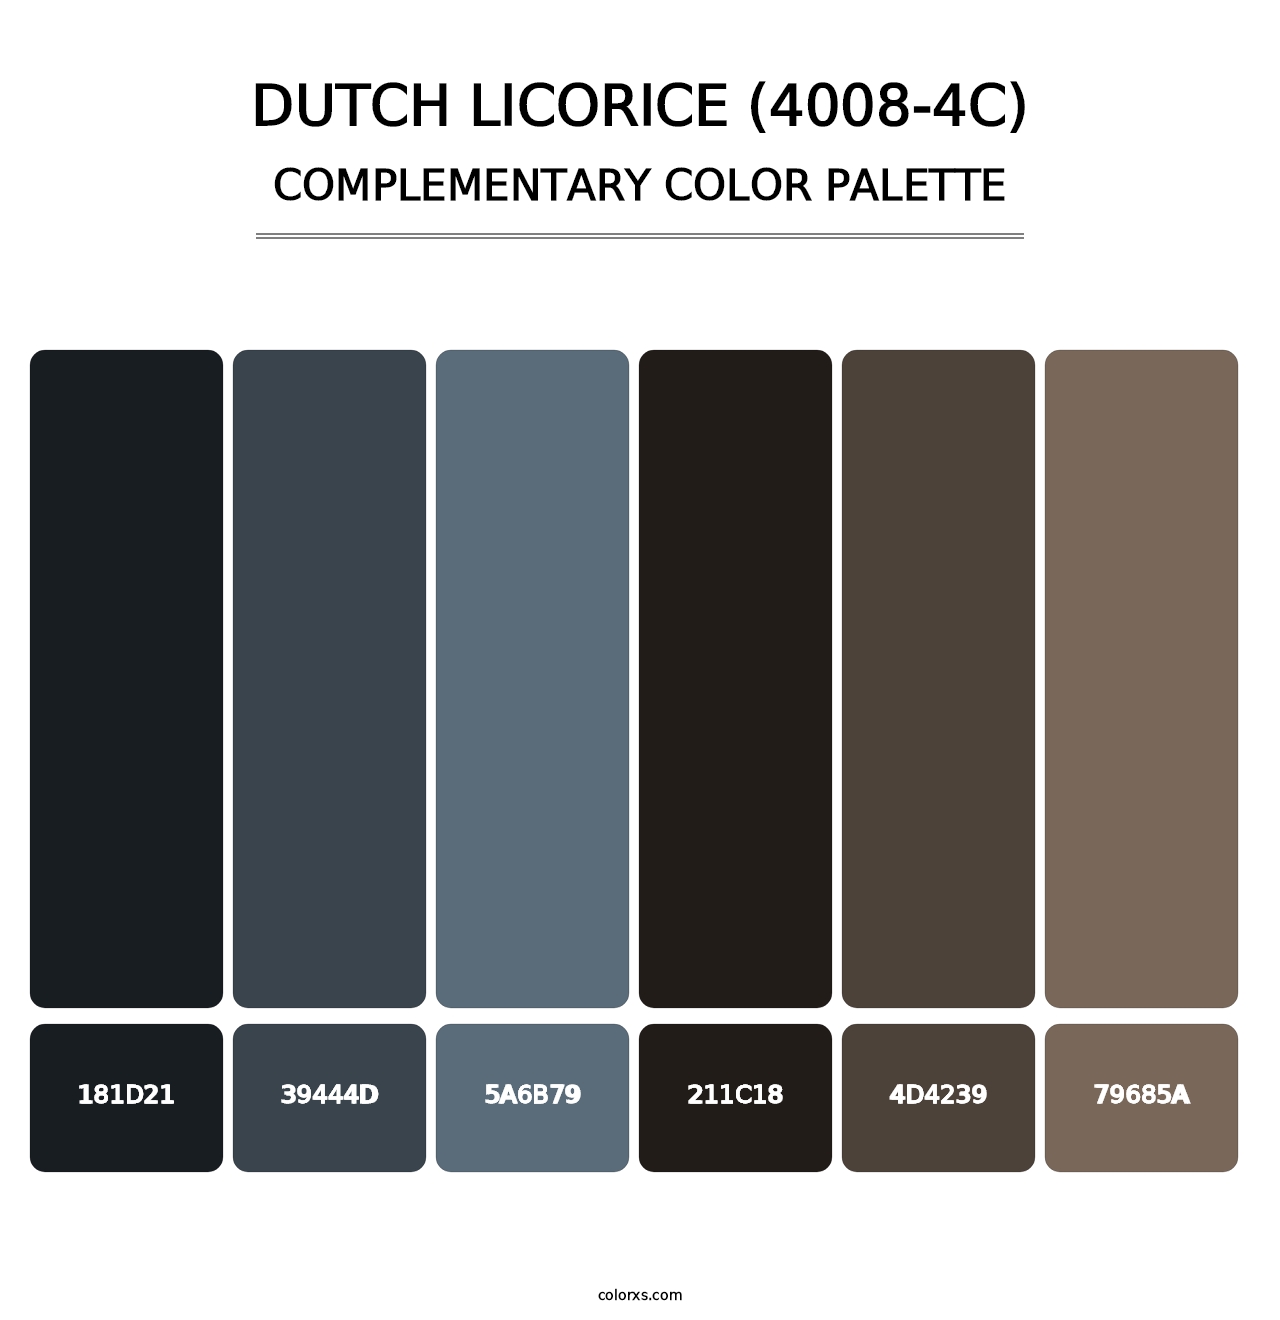 Dutch Licorice (4008-4C) - Complementary Color Palette